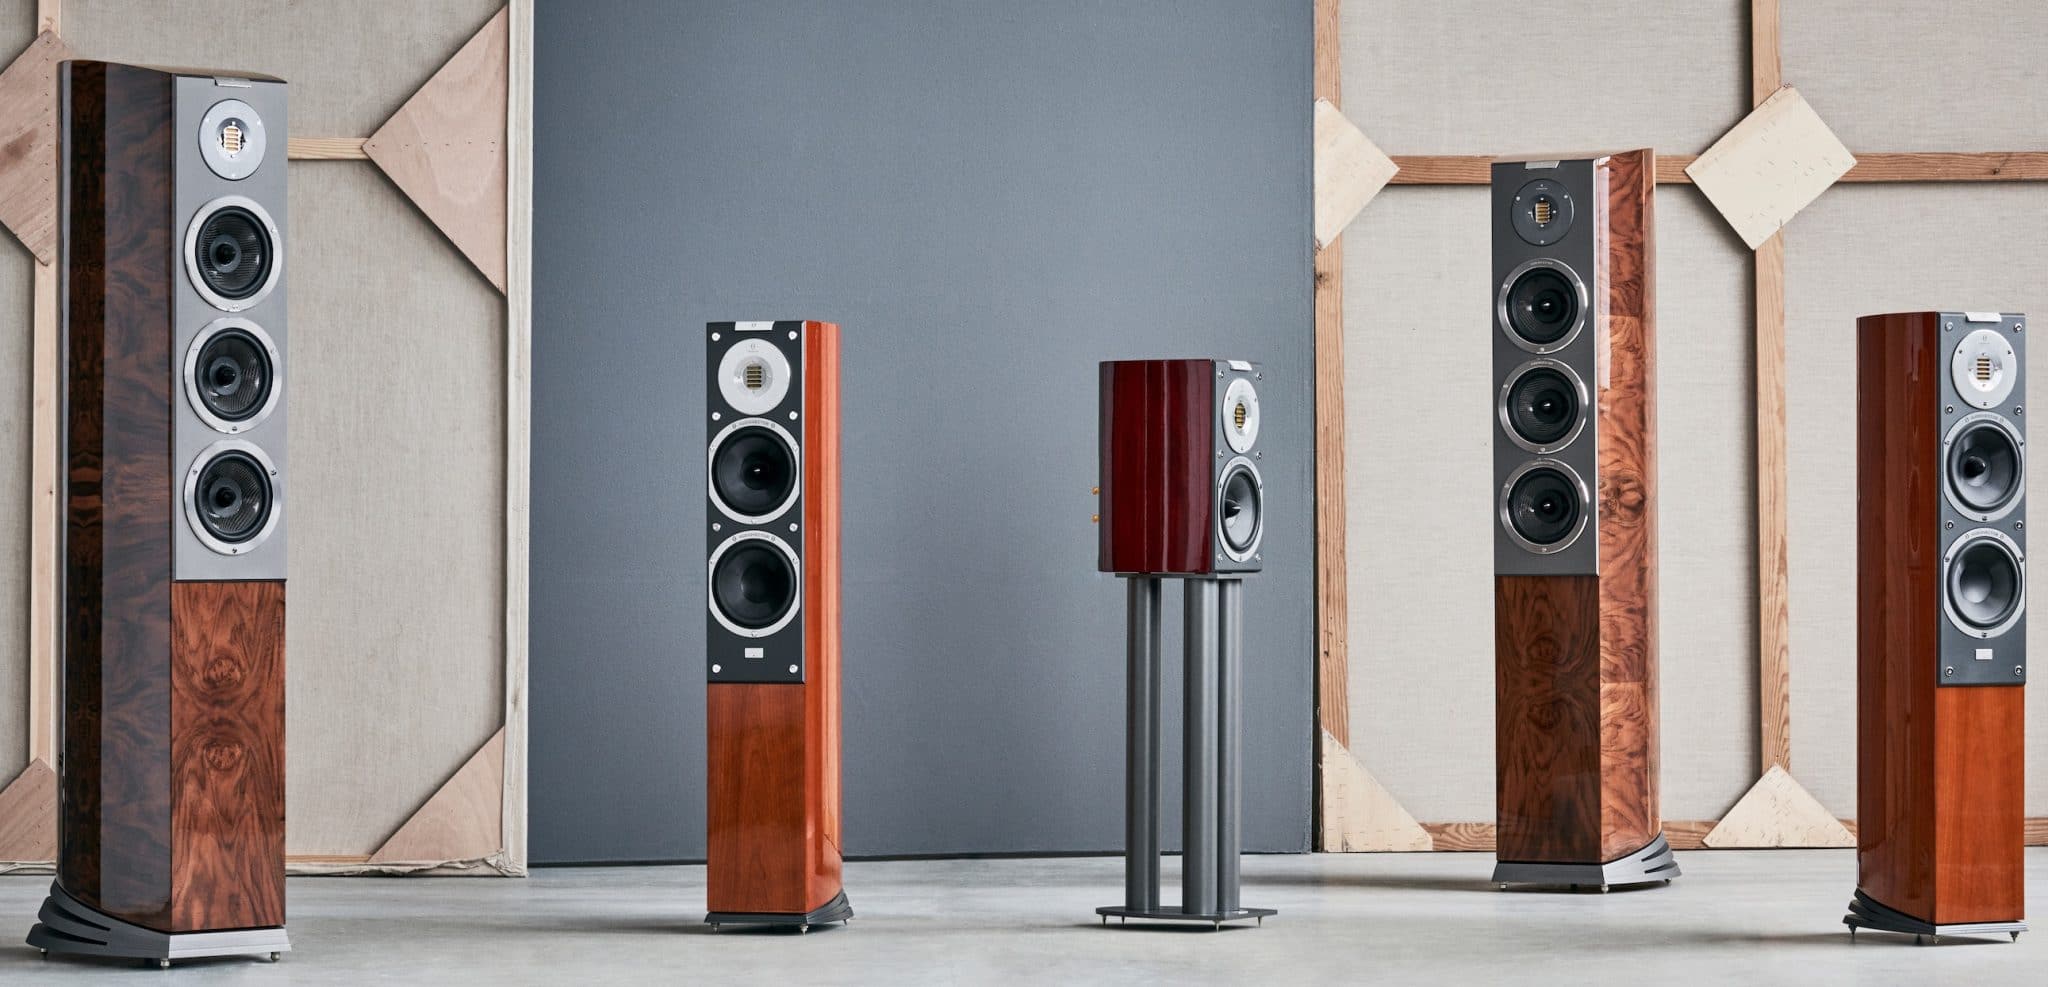 Audiovector Speakers: Trade-in Deal Cuts Prices 